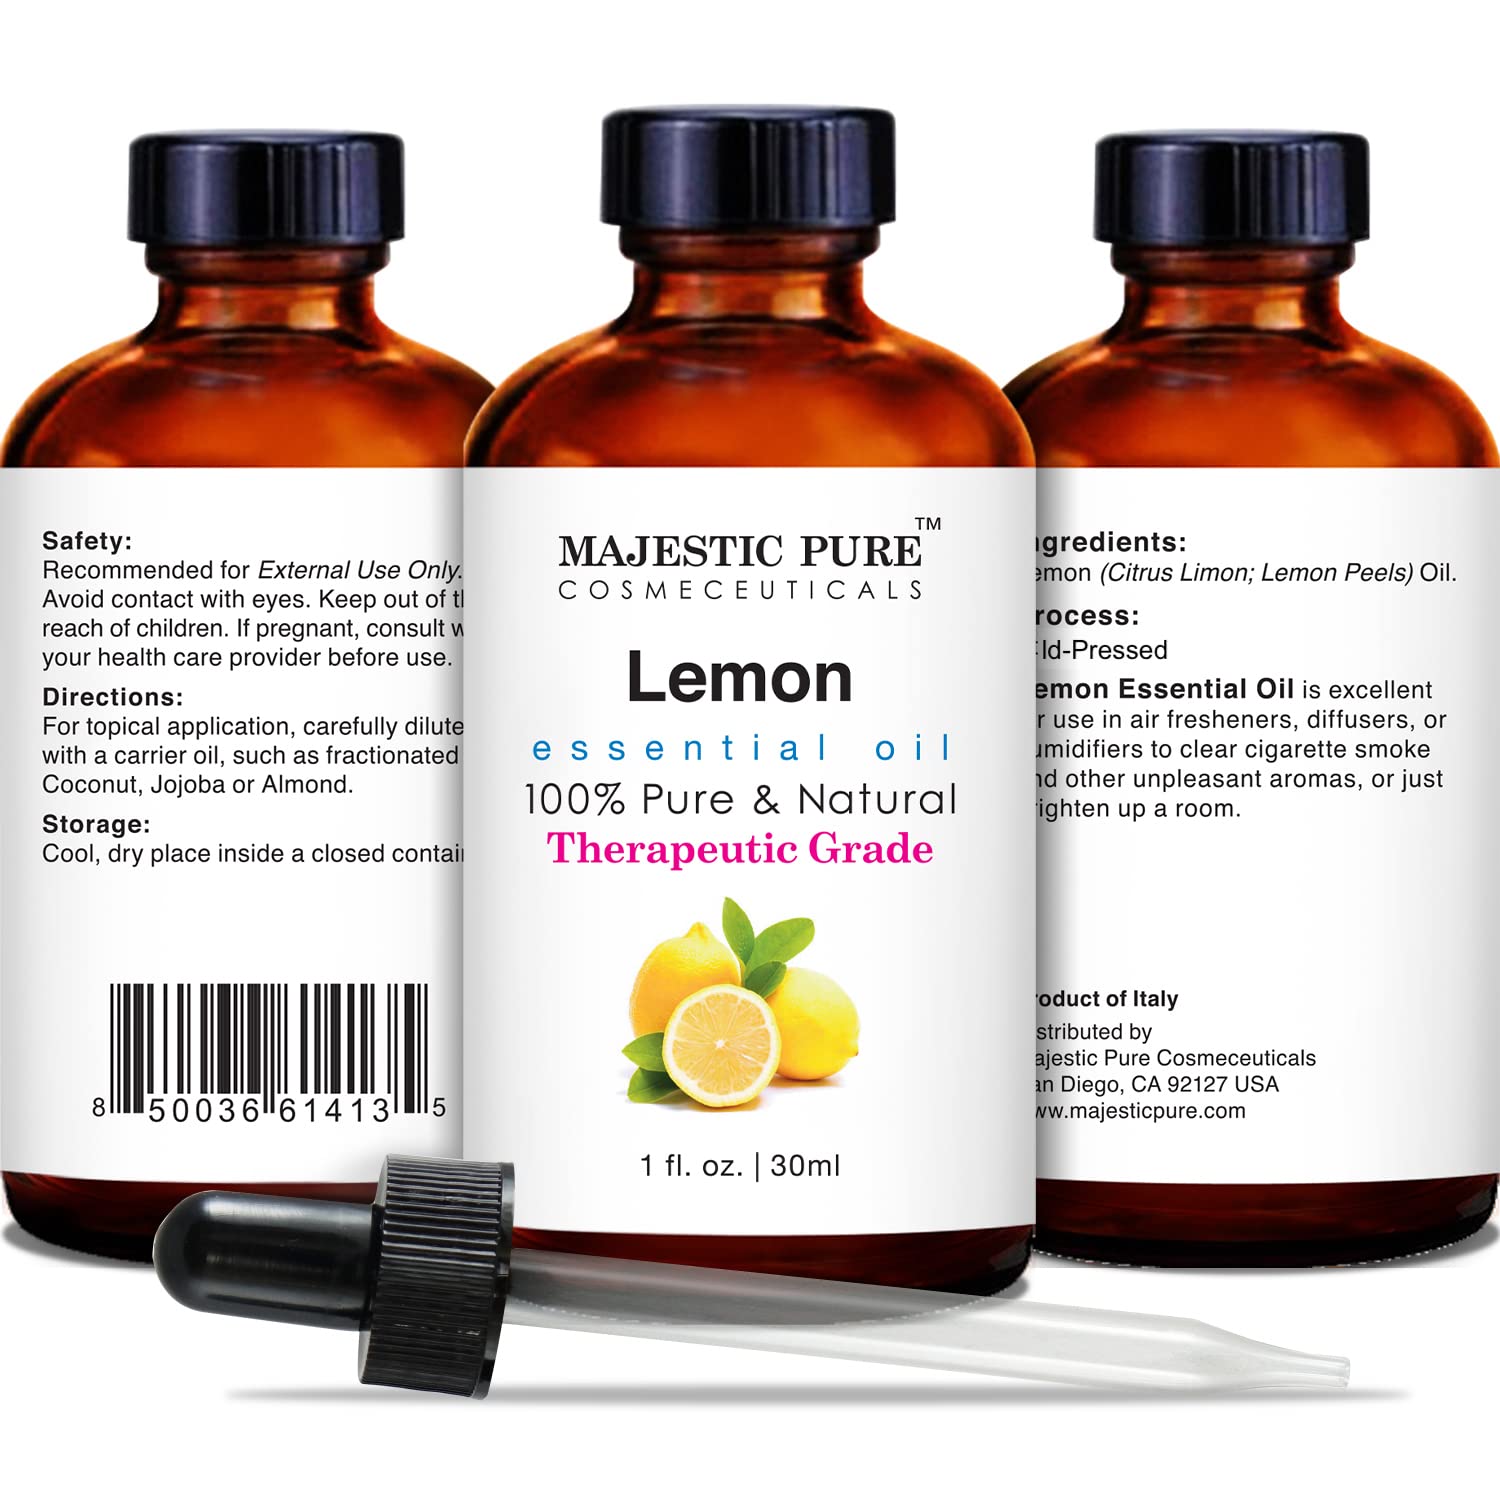 MAJESTIC PURE Lemon Essential Oil, Therapeutic Grade, Pure and Natural, for Aromatherapy, Massage, Topical & Household Uses, 1 fl oz